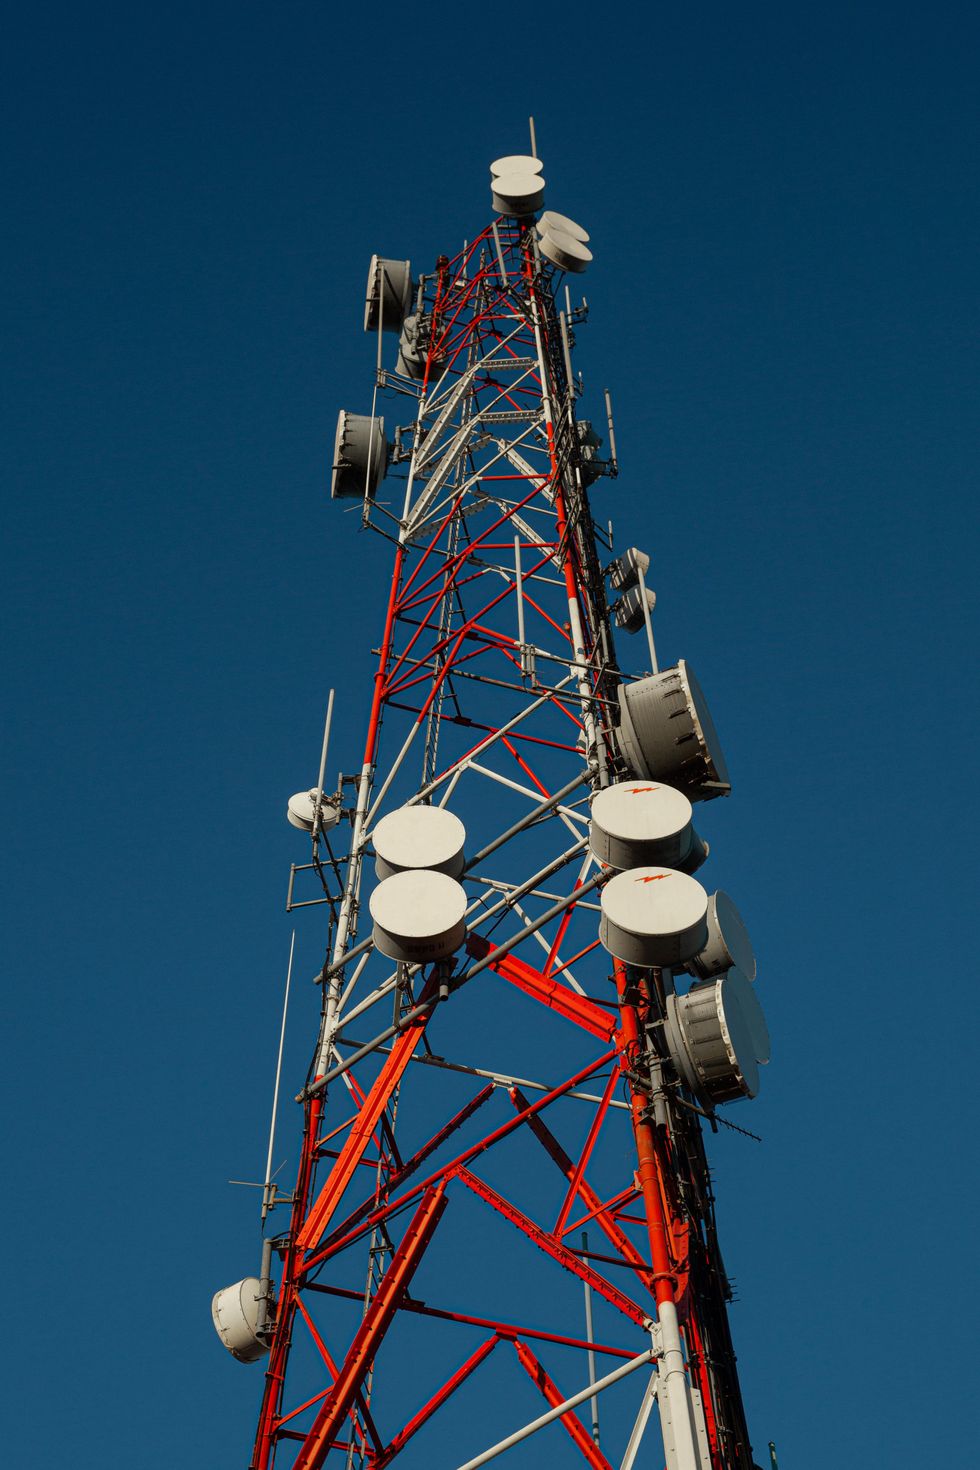 This photo shows a radio tower with many drum-like antennas pointed in various directions.